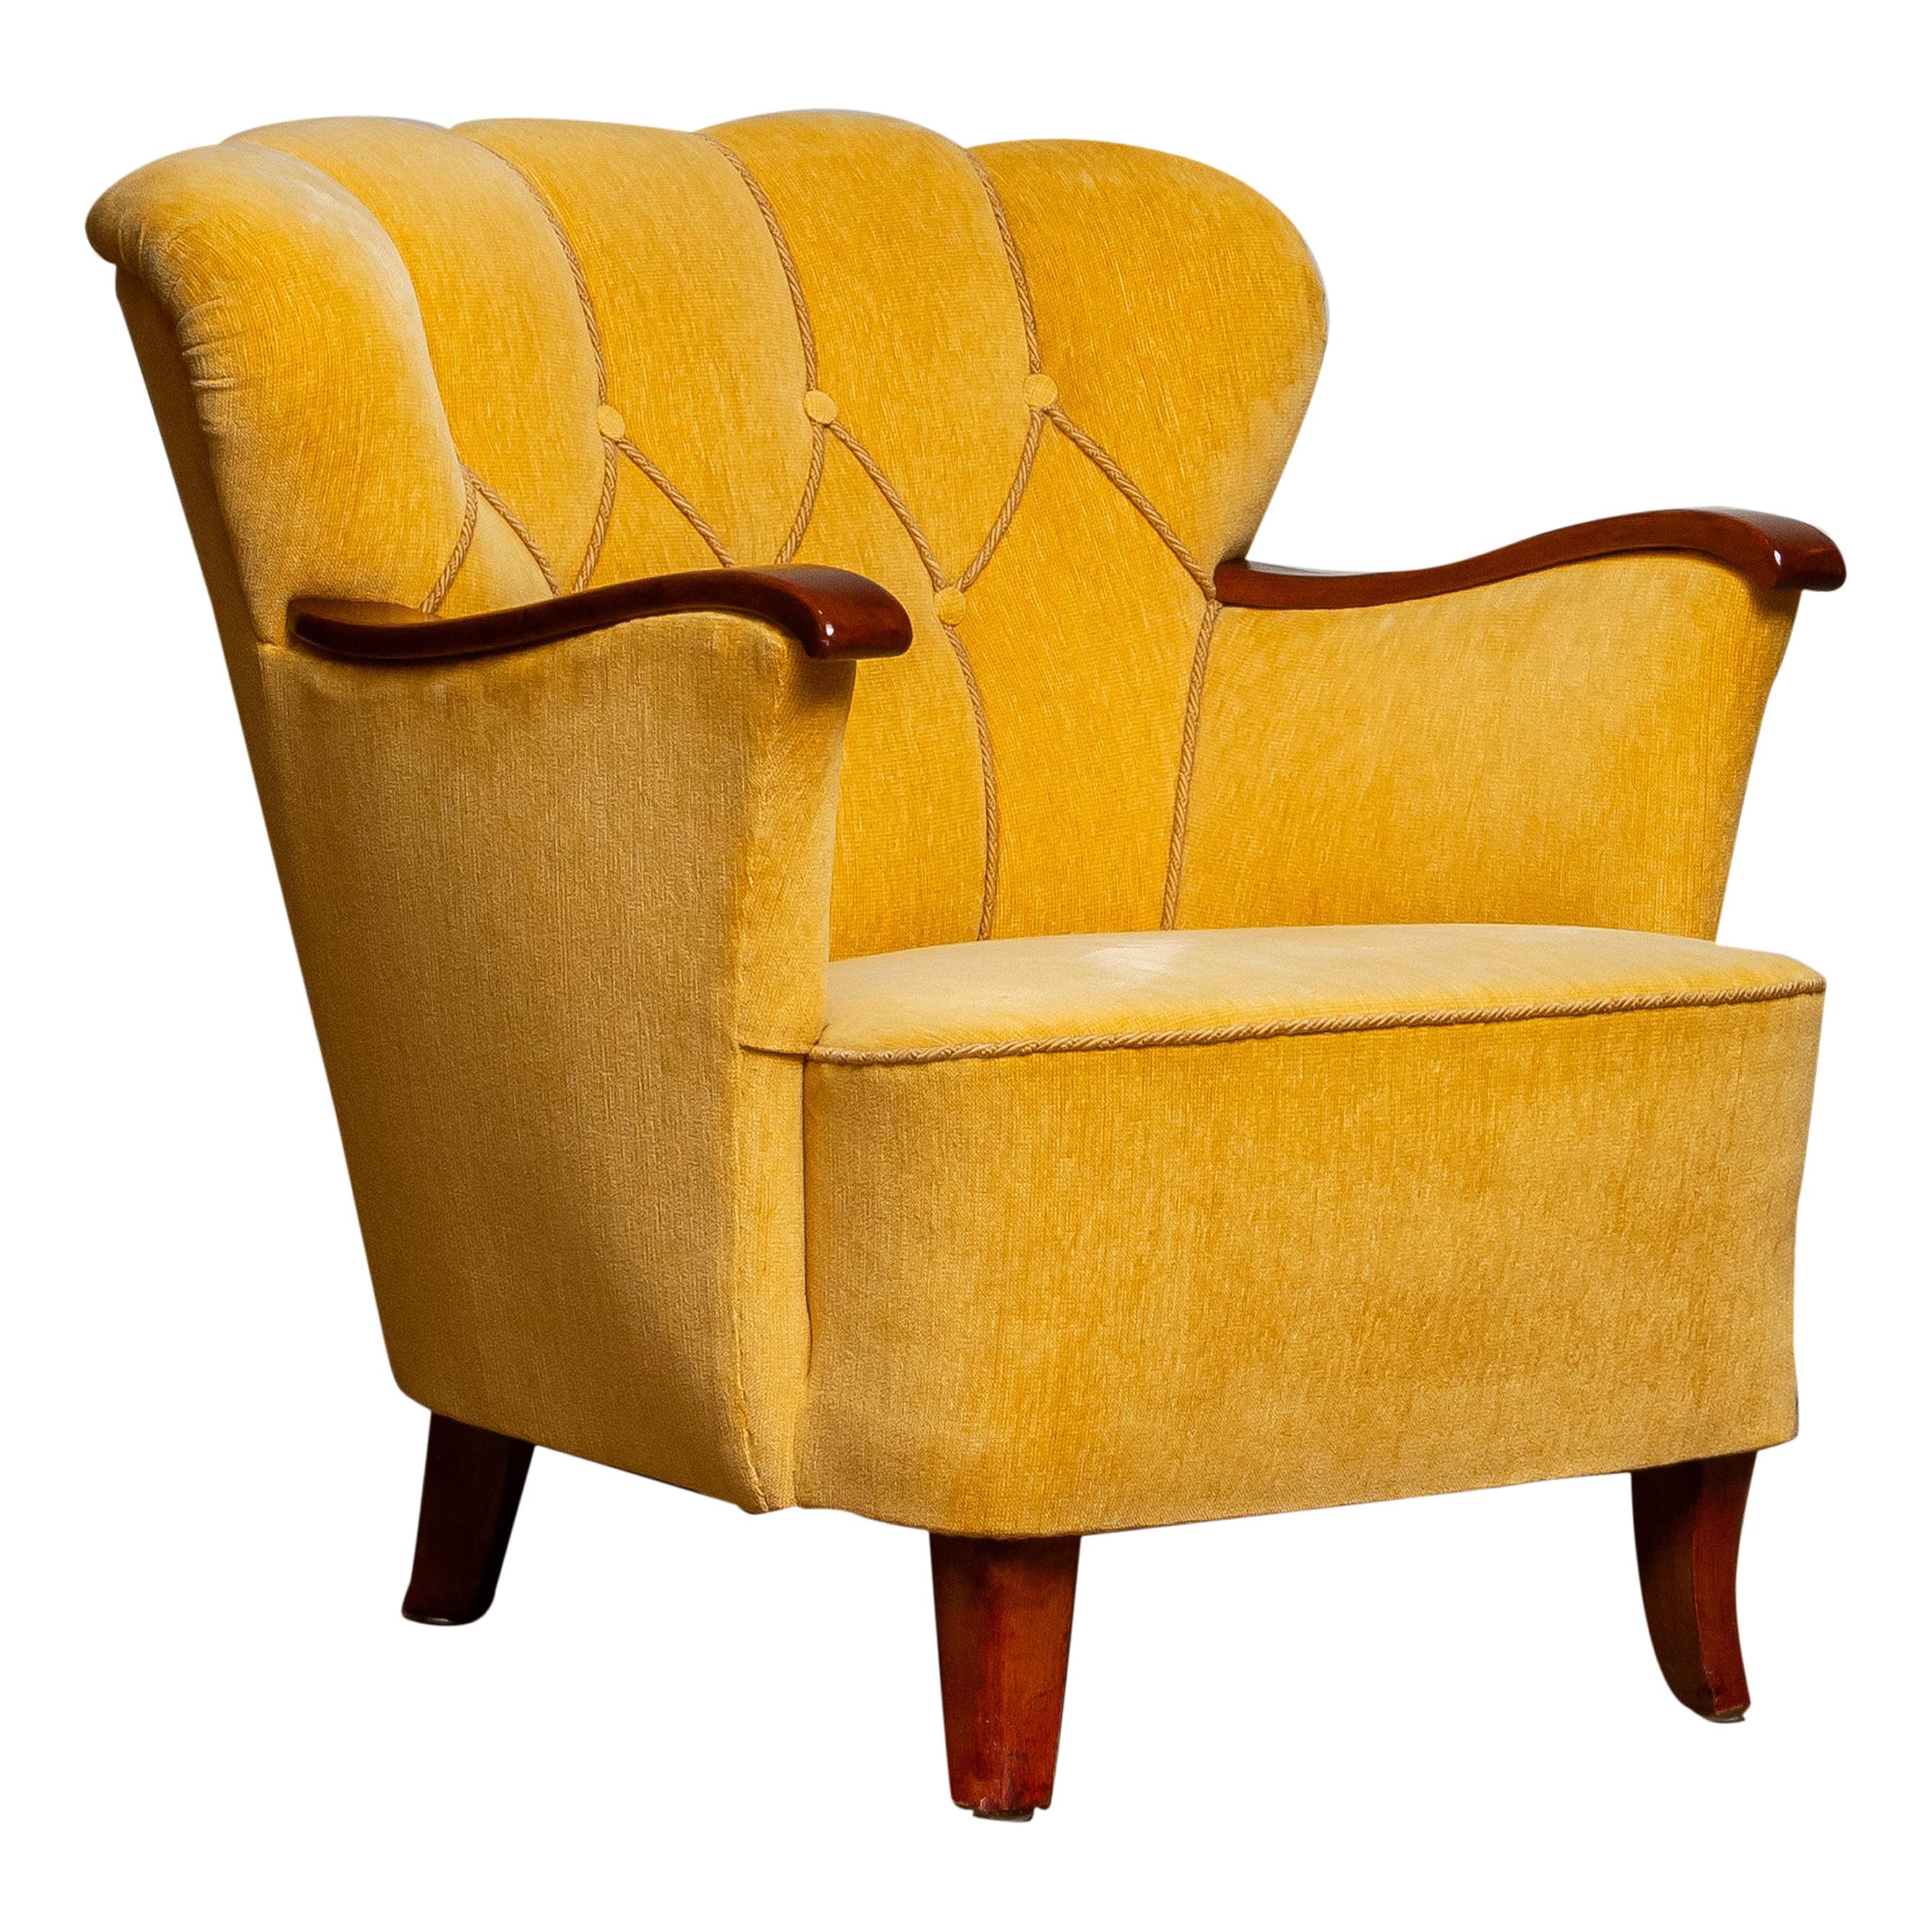 Swedish Yellow Velvet Lounge / Easy / Club Chair with Mahogany Details from Sweden, 1940